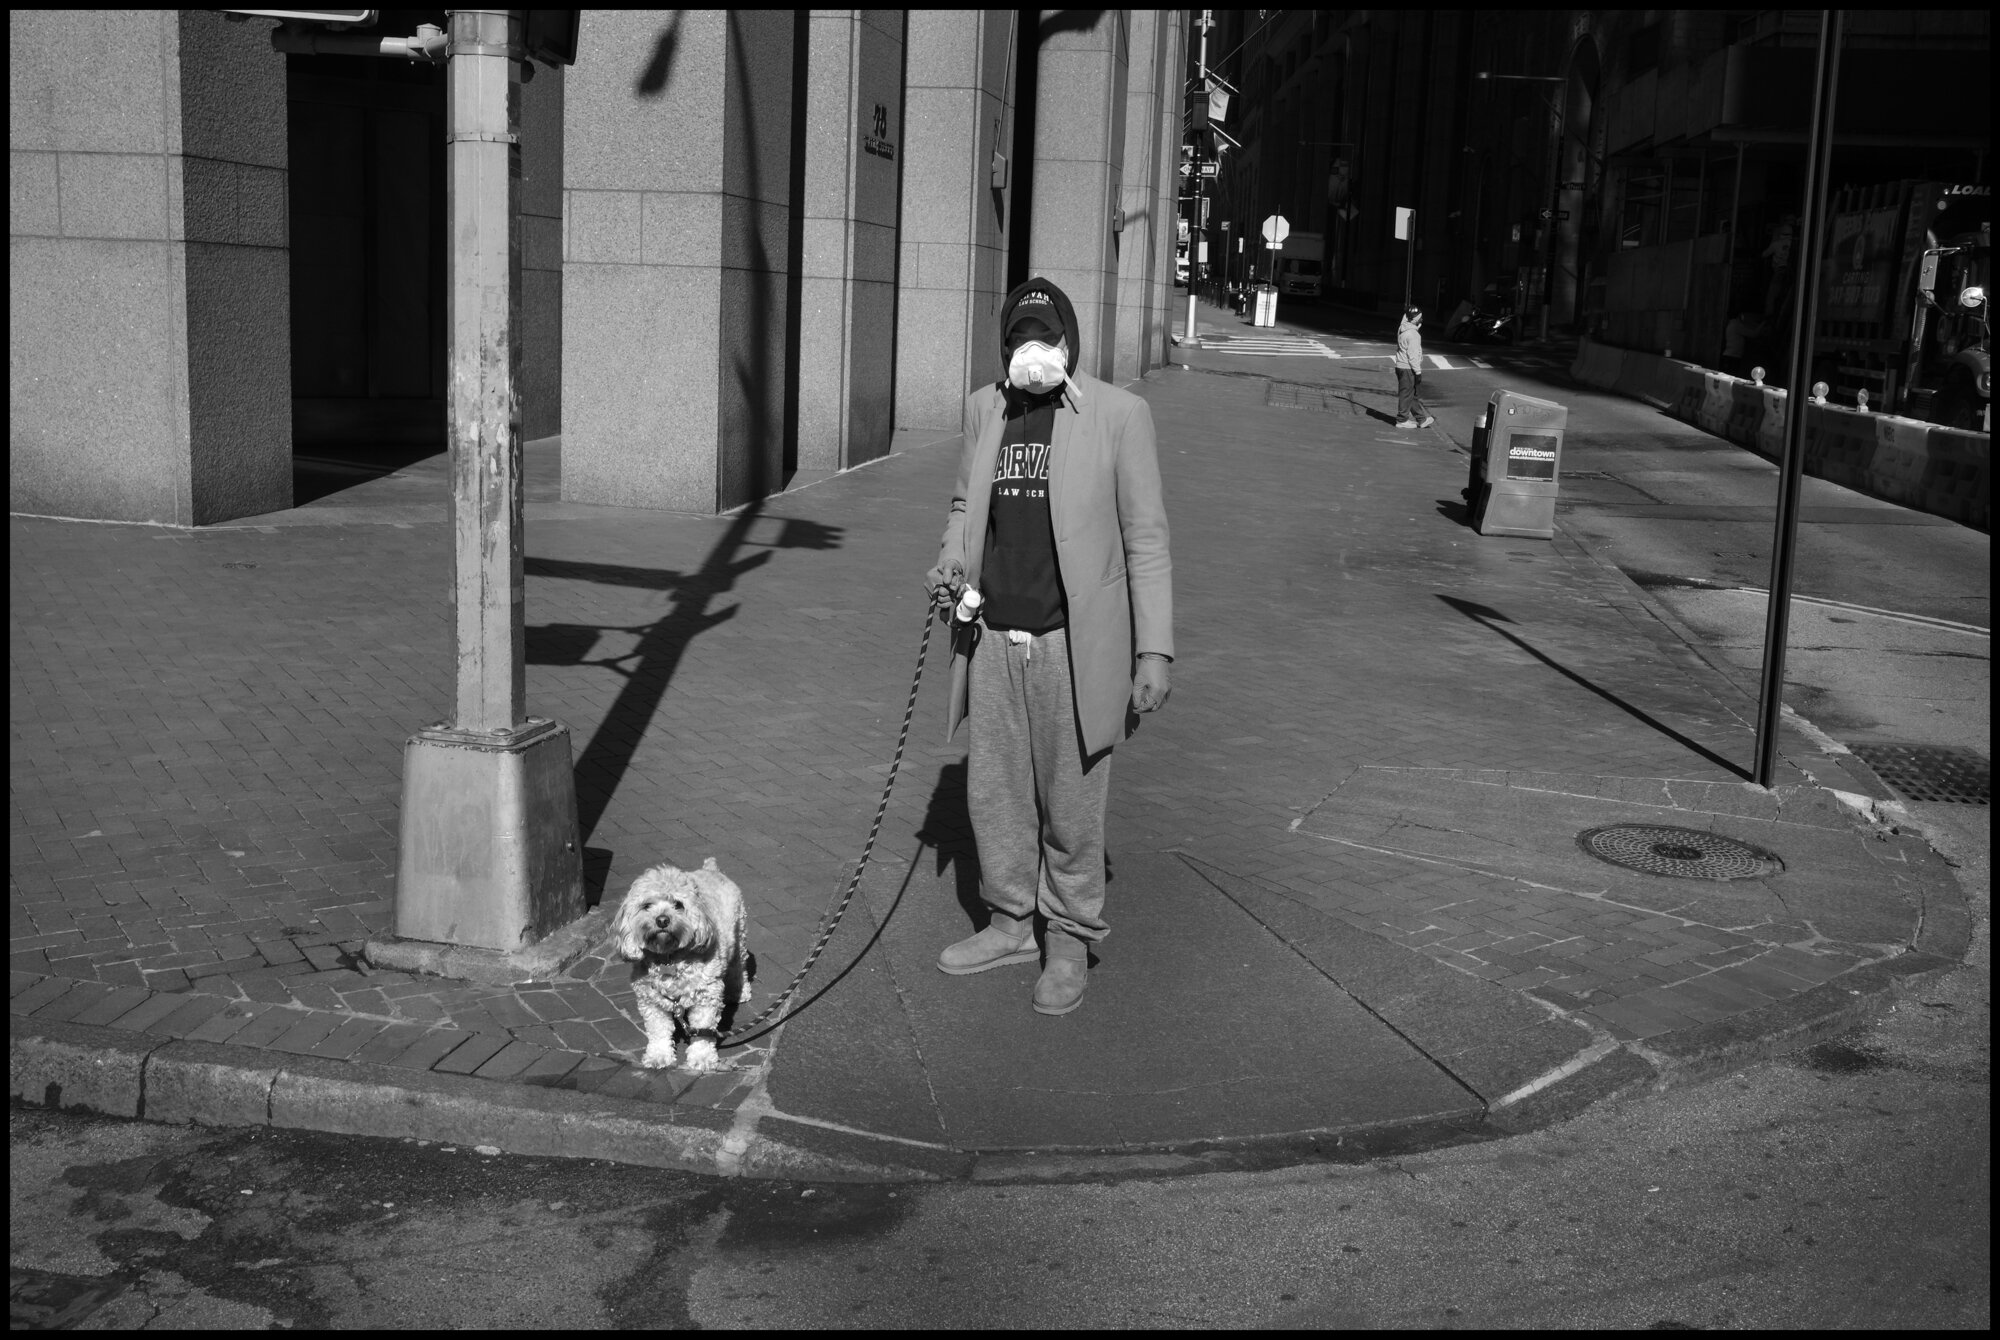  A man walks his dog on Wall Street.  March 26, 2020 ©Peter Turnley  ID# 04-010 